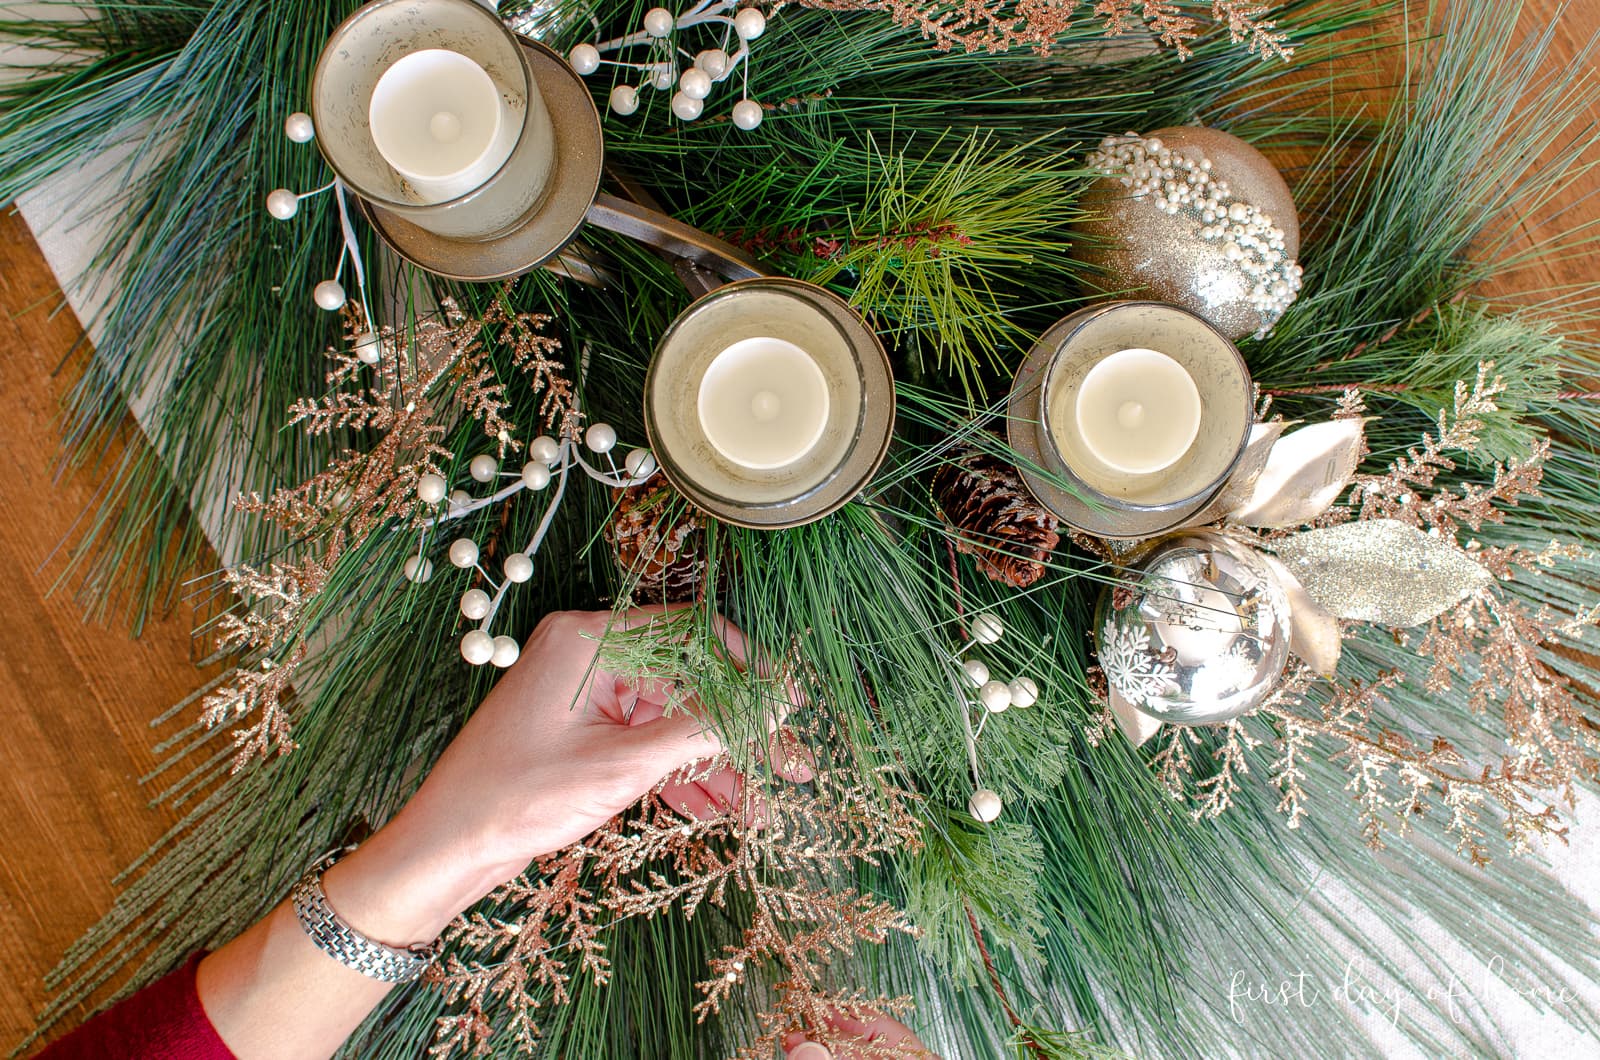 Placing metallic floral accents in DIY holiday centerpiece with mixed evergreens and mercury glass candleholders.